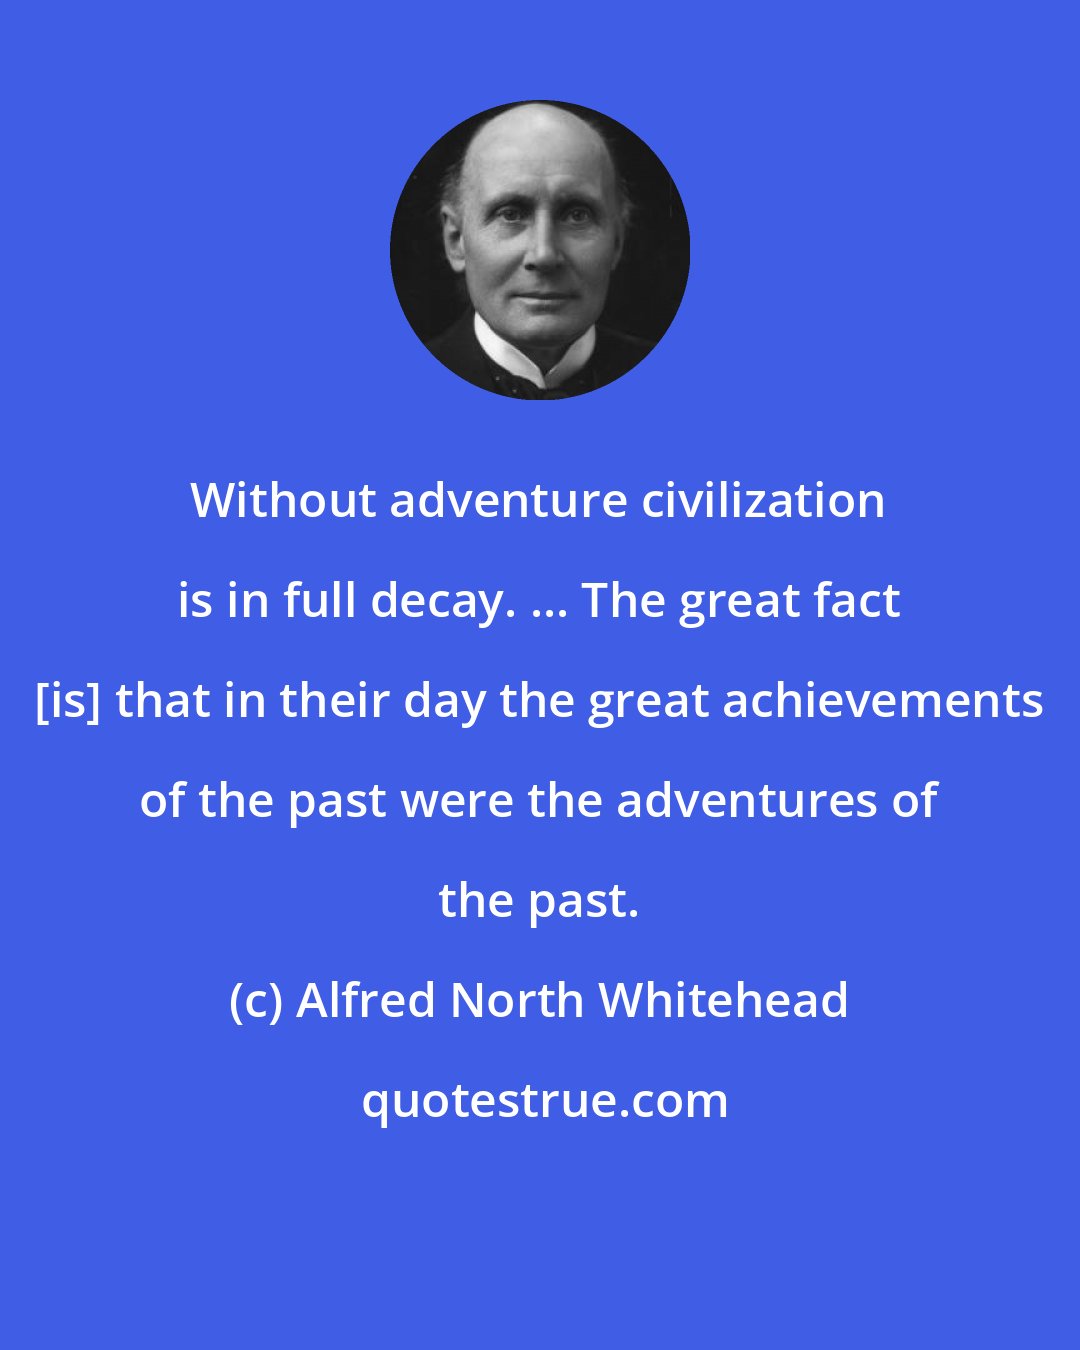 Alfred North Whitehead: Without adventure civilization is in full decay. ... The great fact [is] that in their day the great achievements of the past were the adventures of the past.